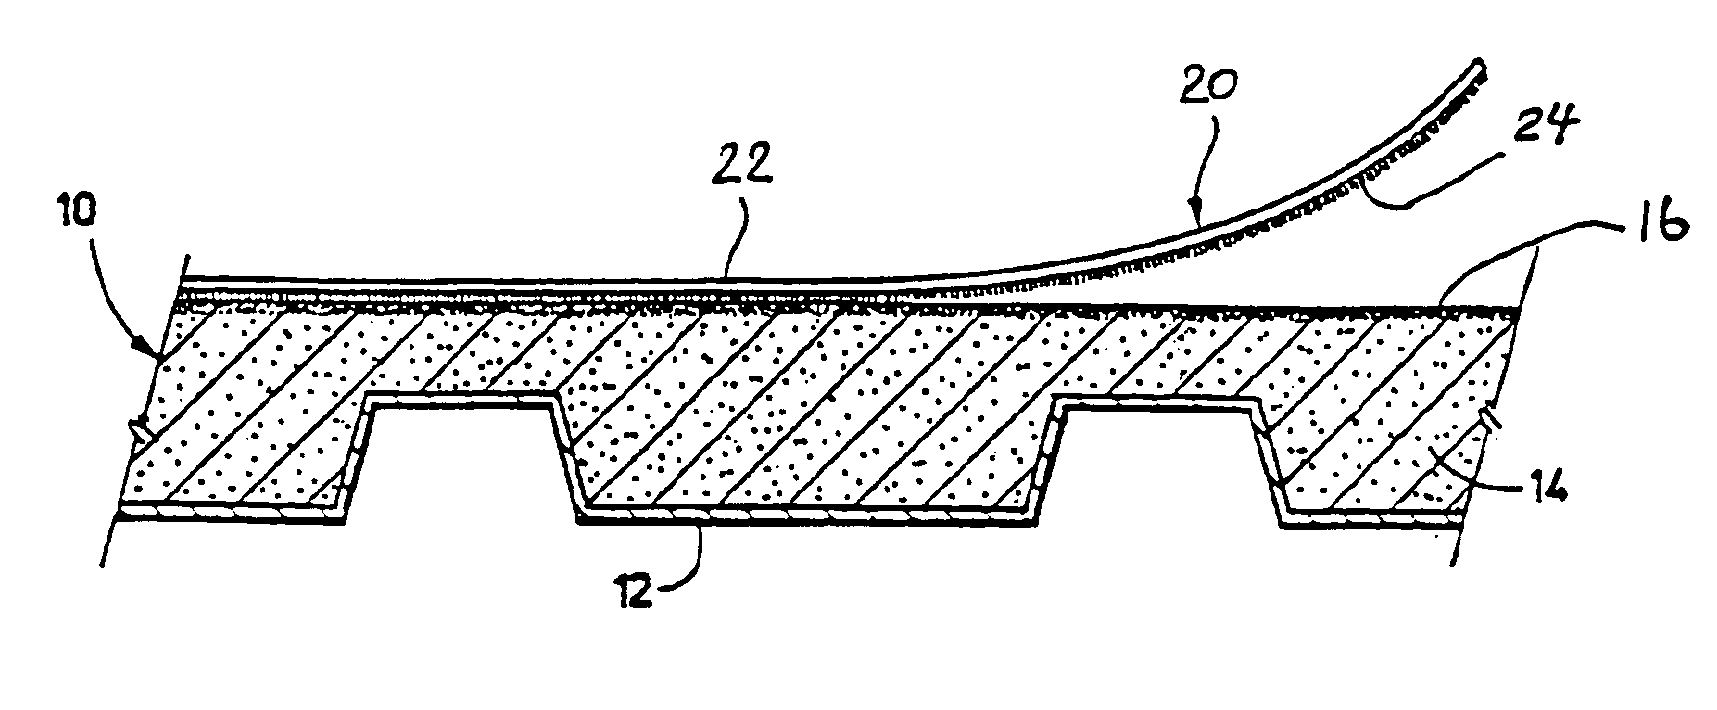 Non-cellular adhesive for composite roof structure